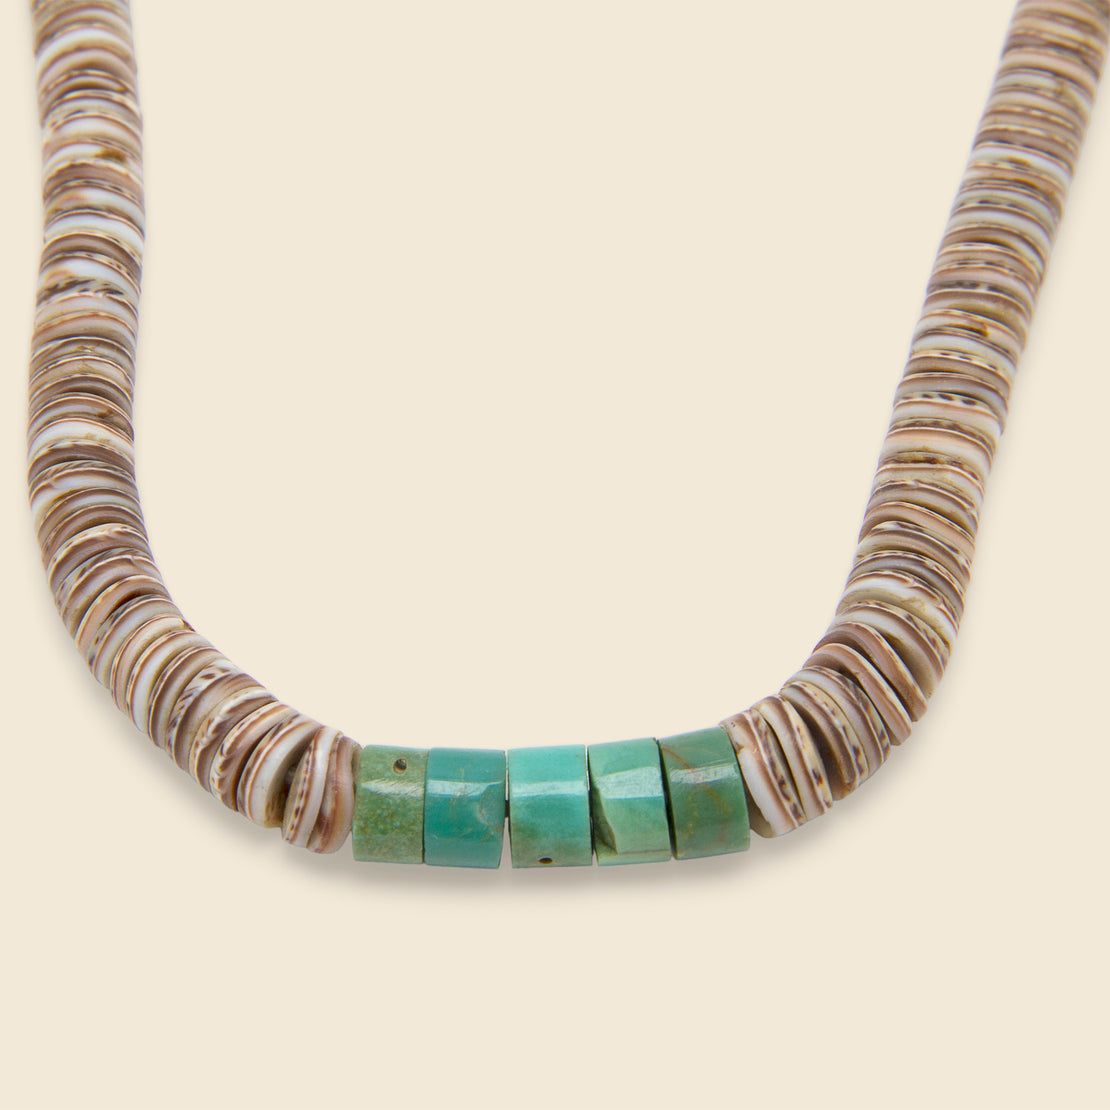 Heishe Necklace - Turquoise & Pin Shell